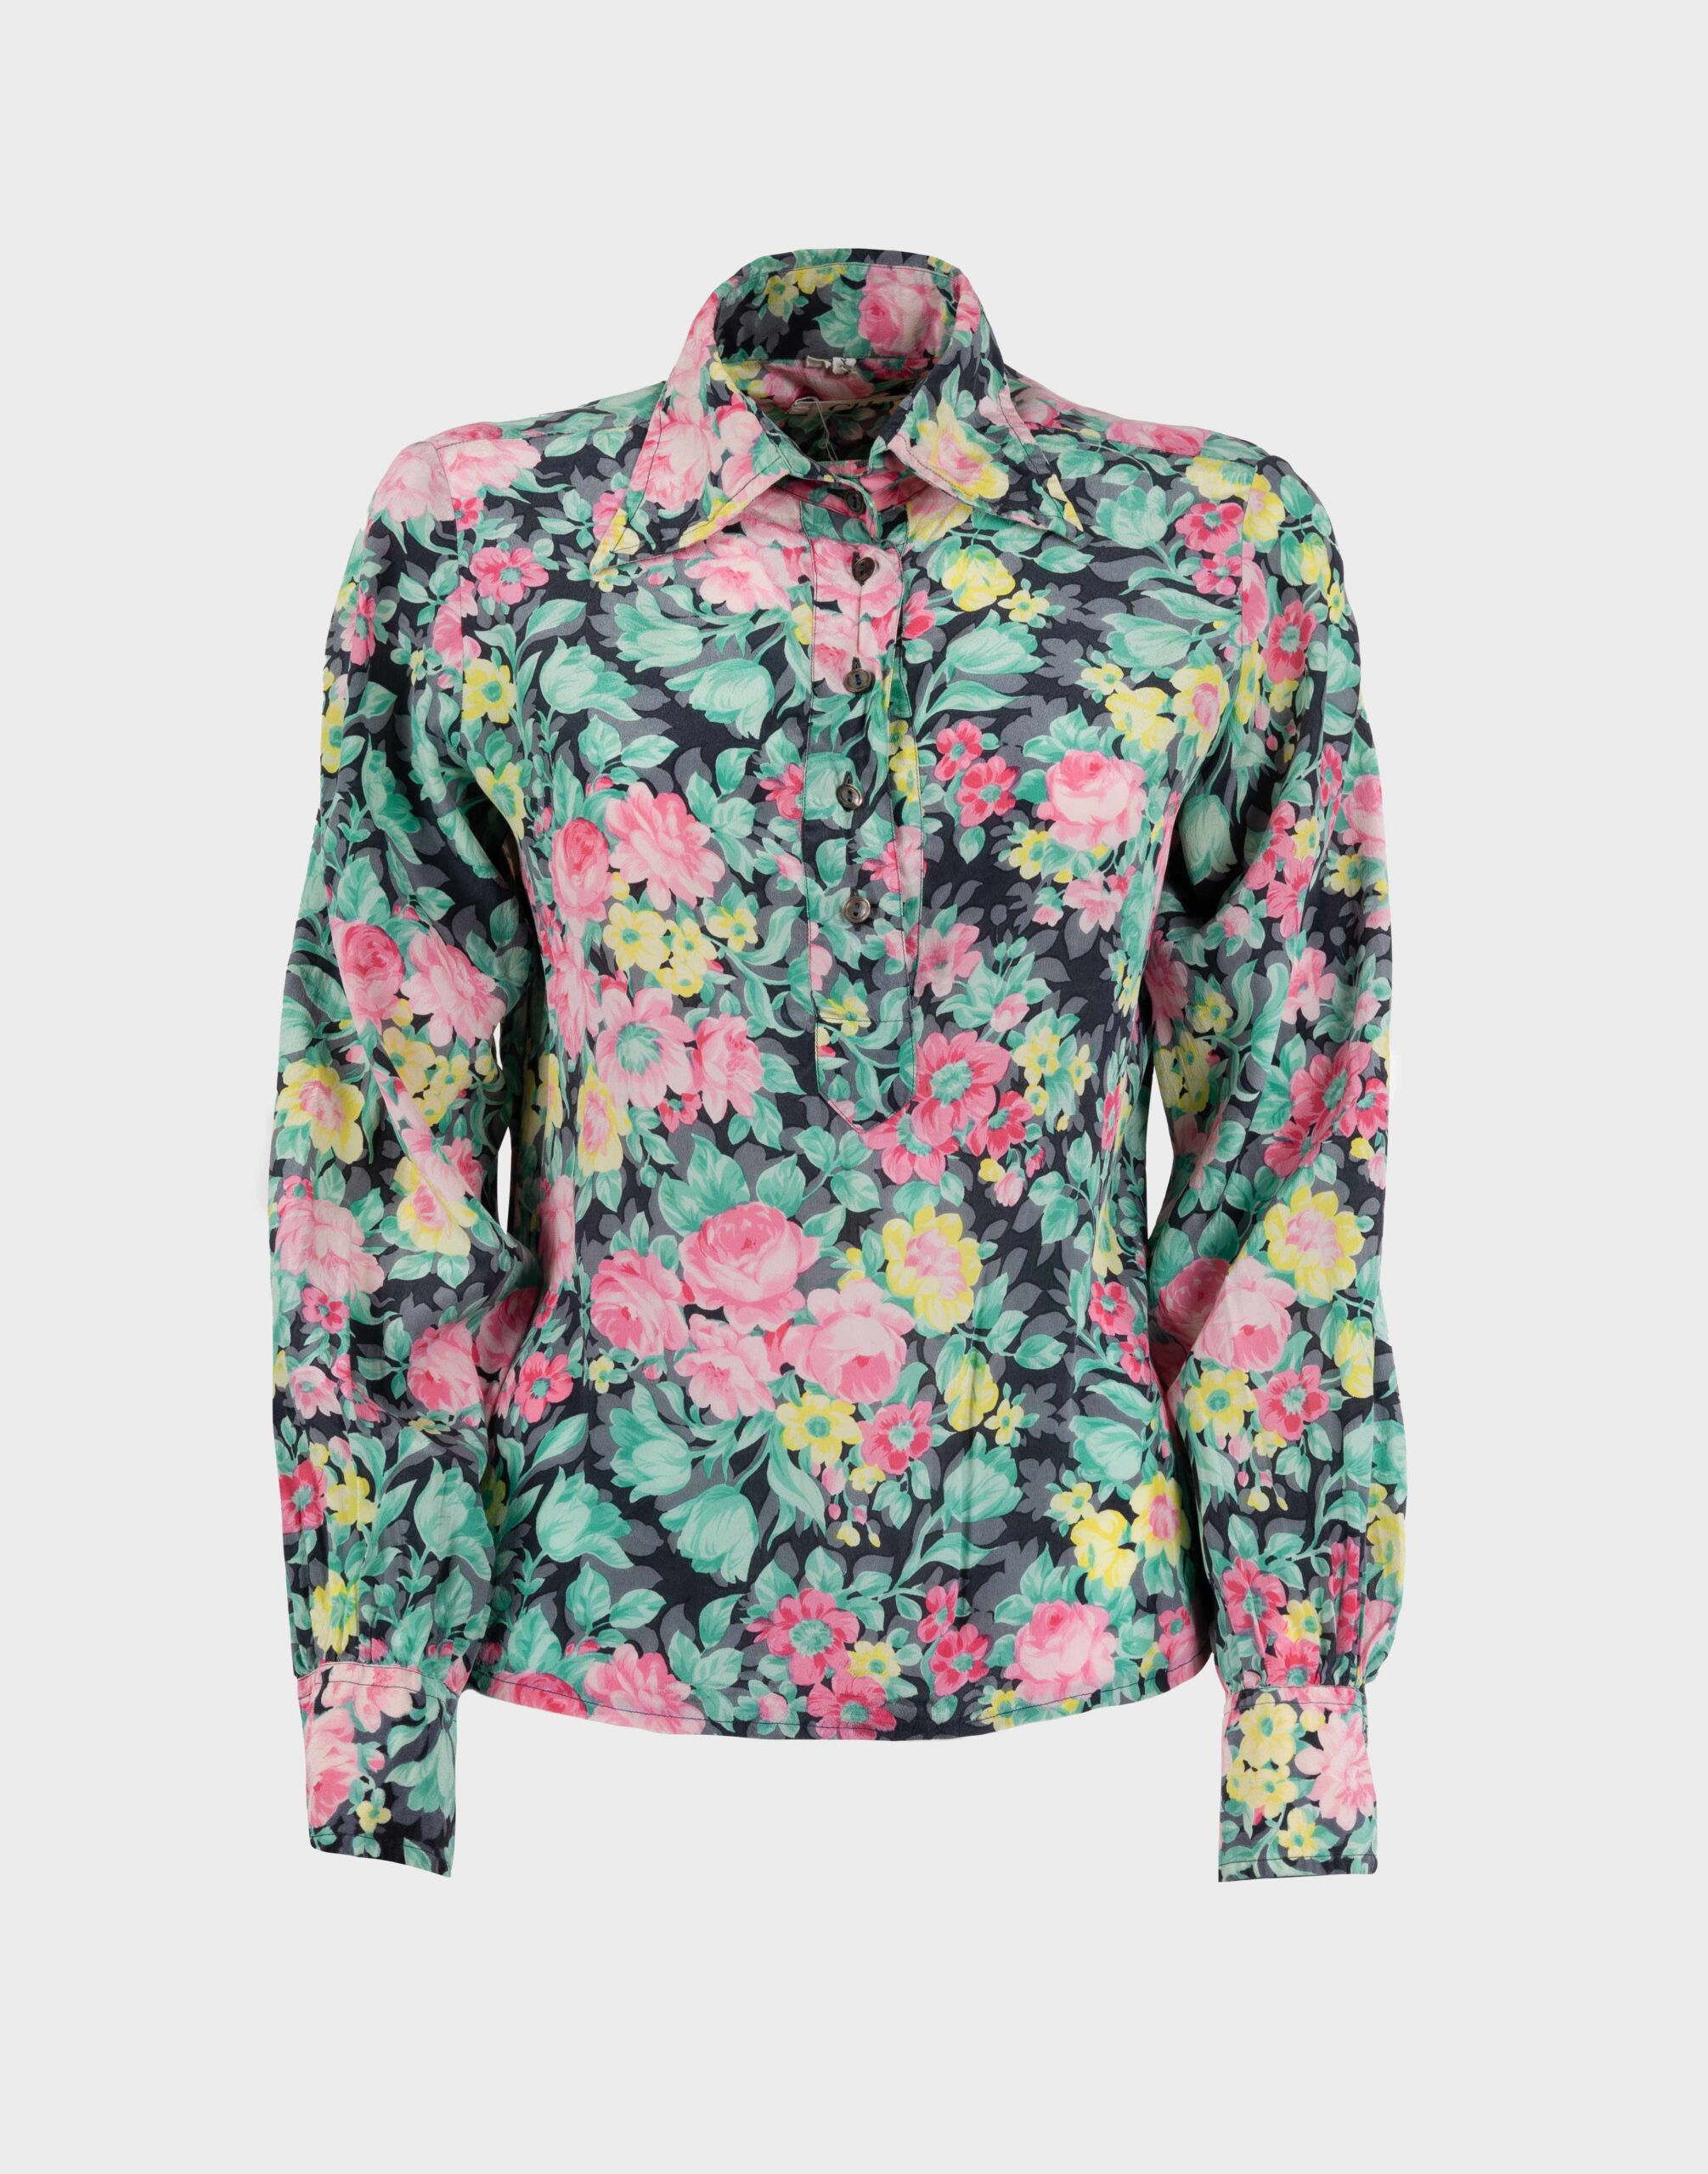 Women's Silk Blouse in Gray with Pink and Green Floral Pattern, Button Closure with 5 Buttons